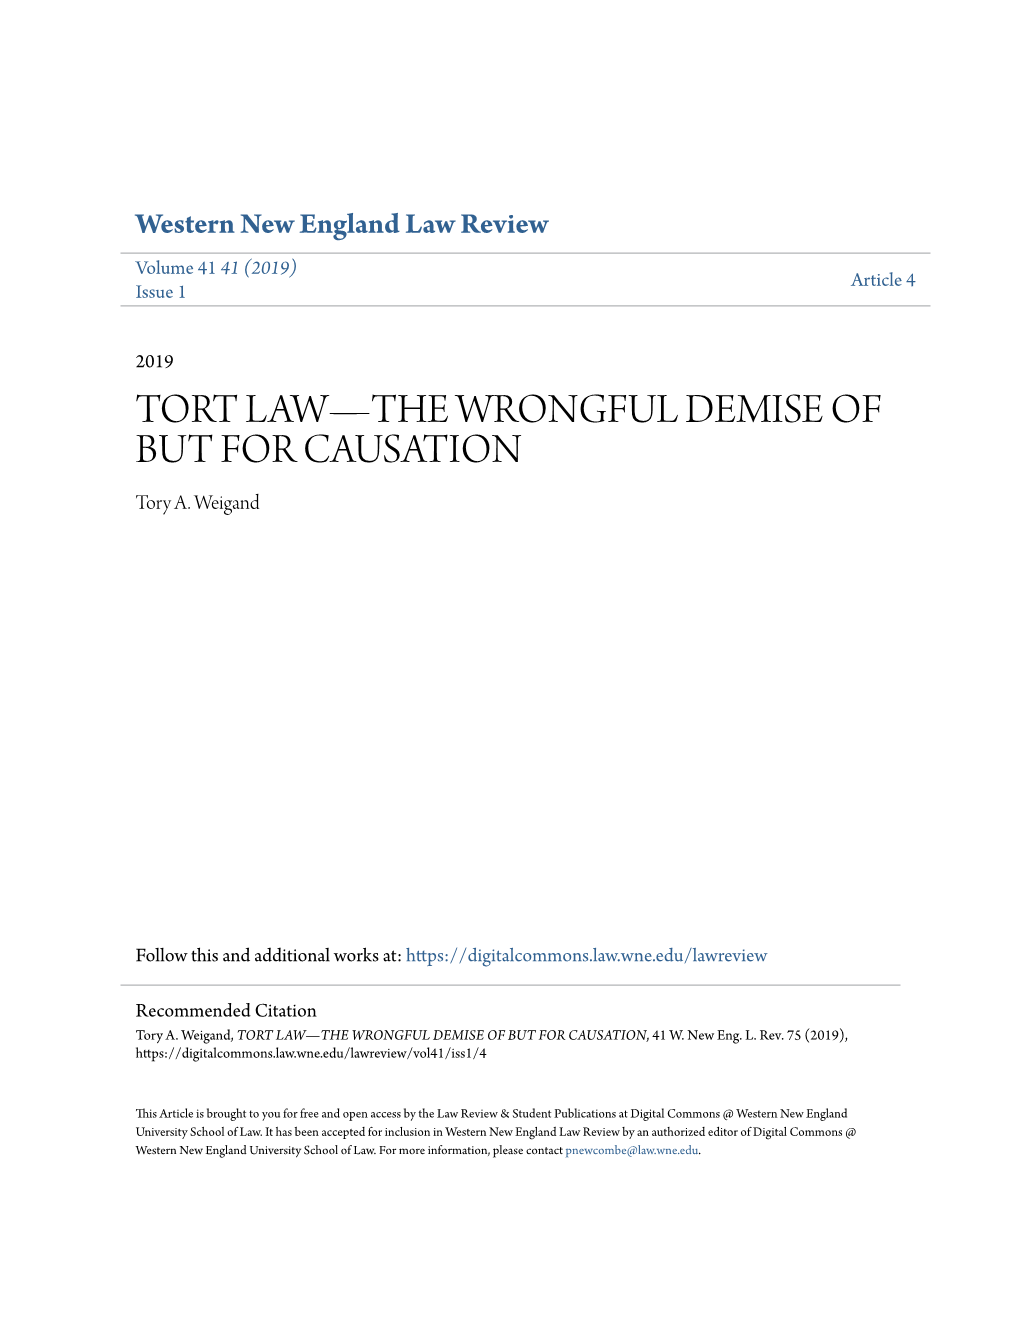 TORT LAW—THE WRONGFUL DEMISE of but for CAUSATION Tory A